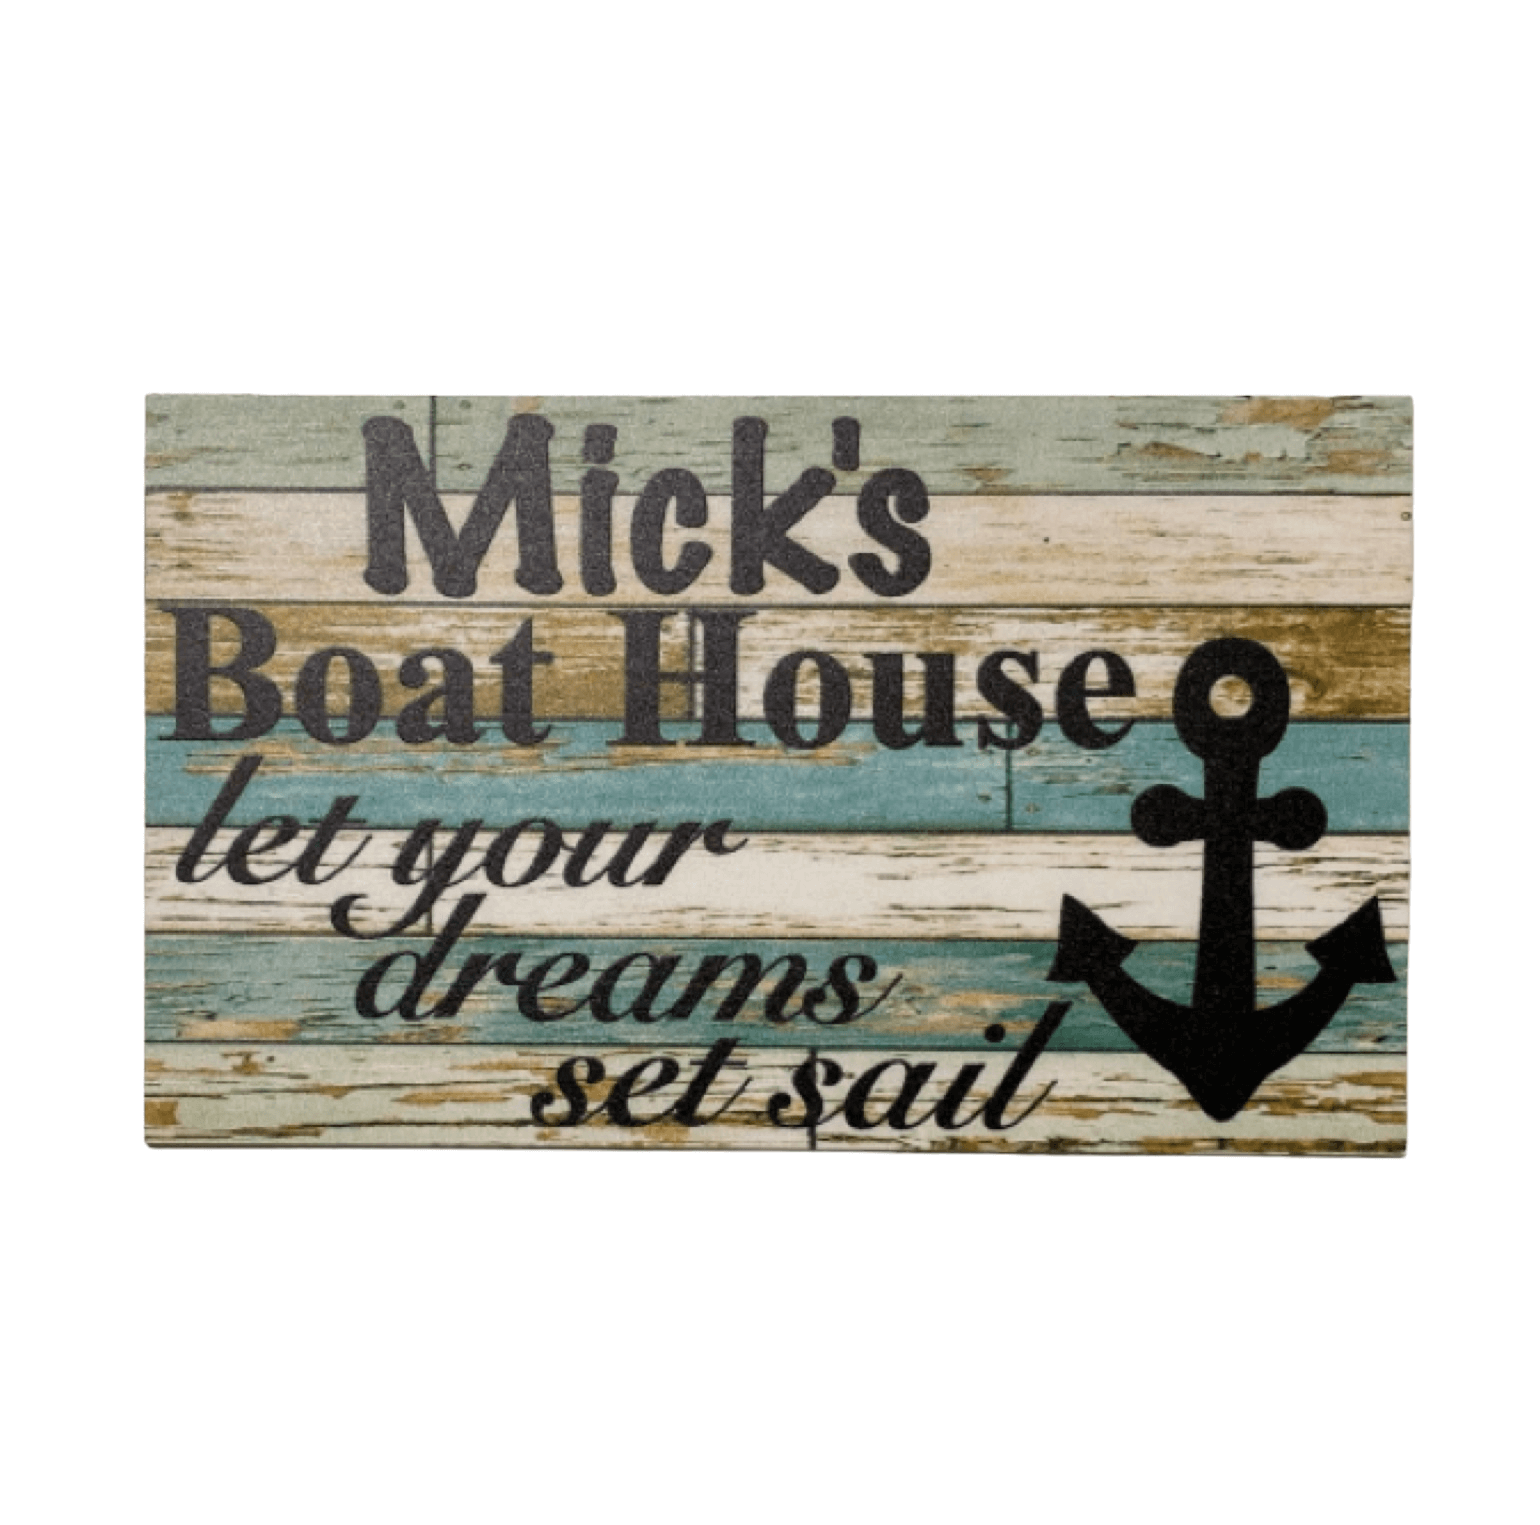 Boat House Dream Set Sail Custom Persoanlised Sign - The Renmy Store Homewares & Gifts 